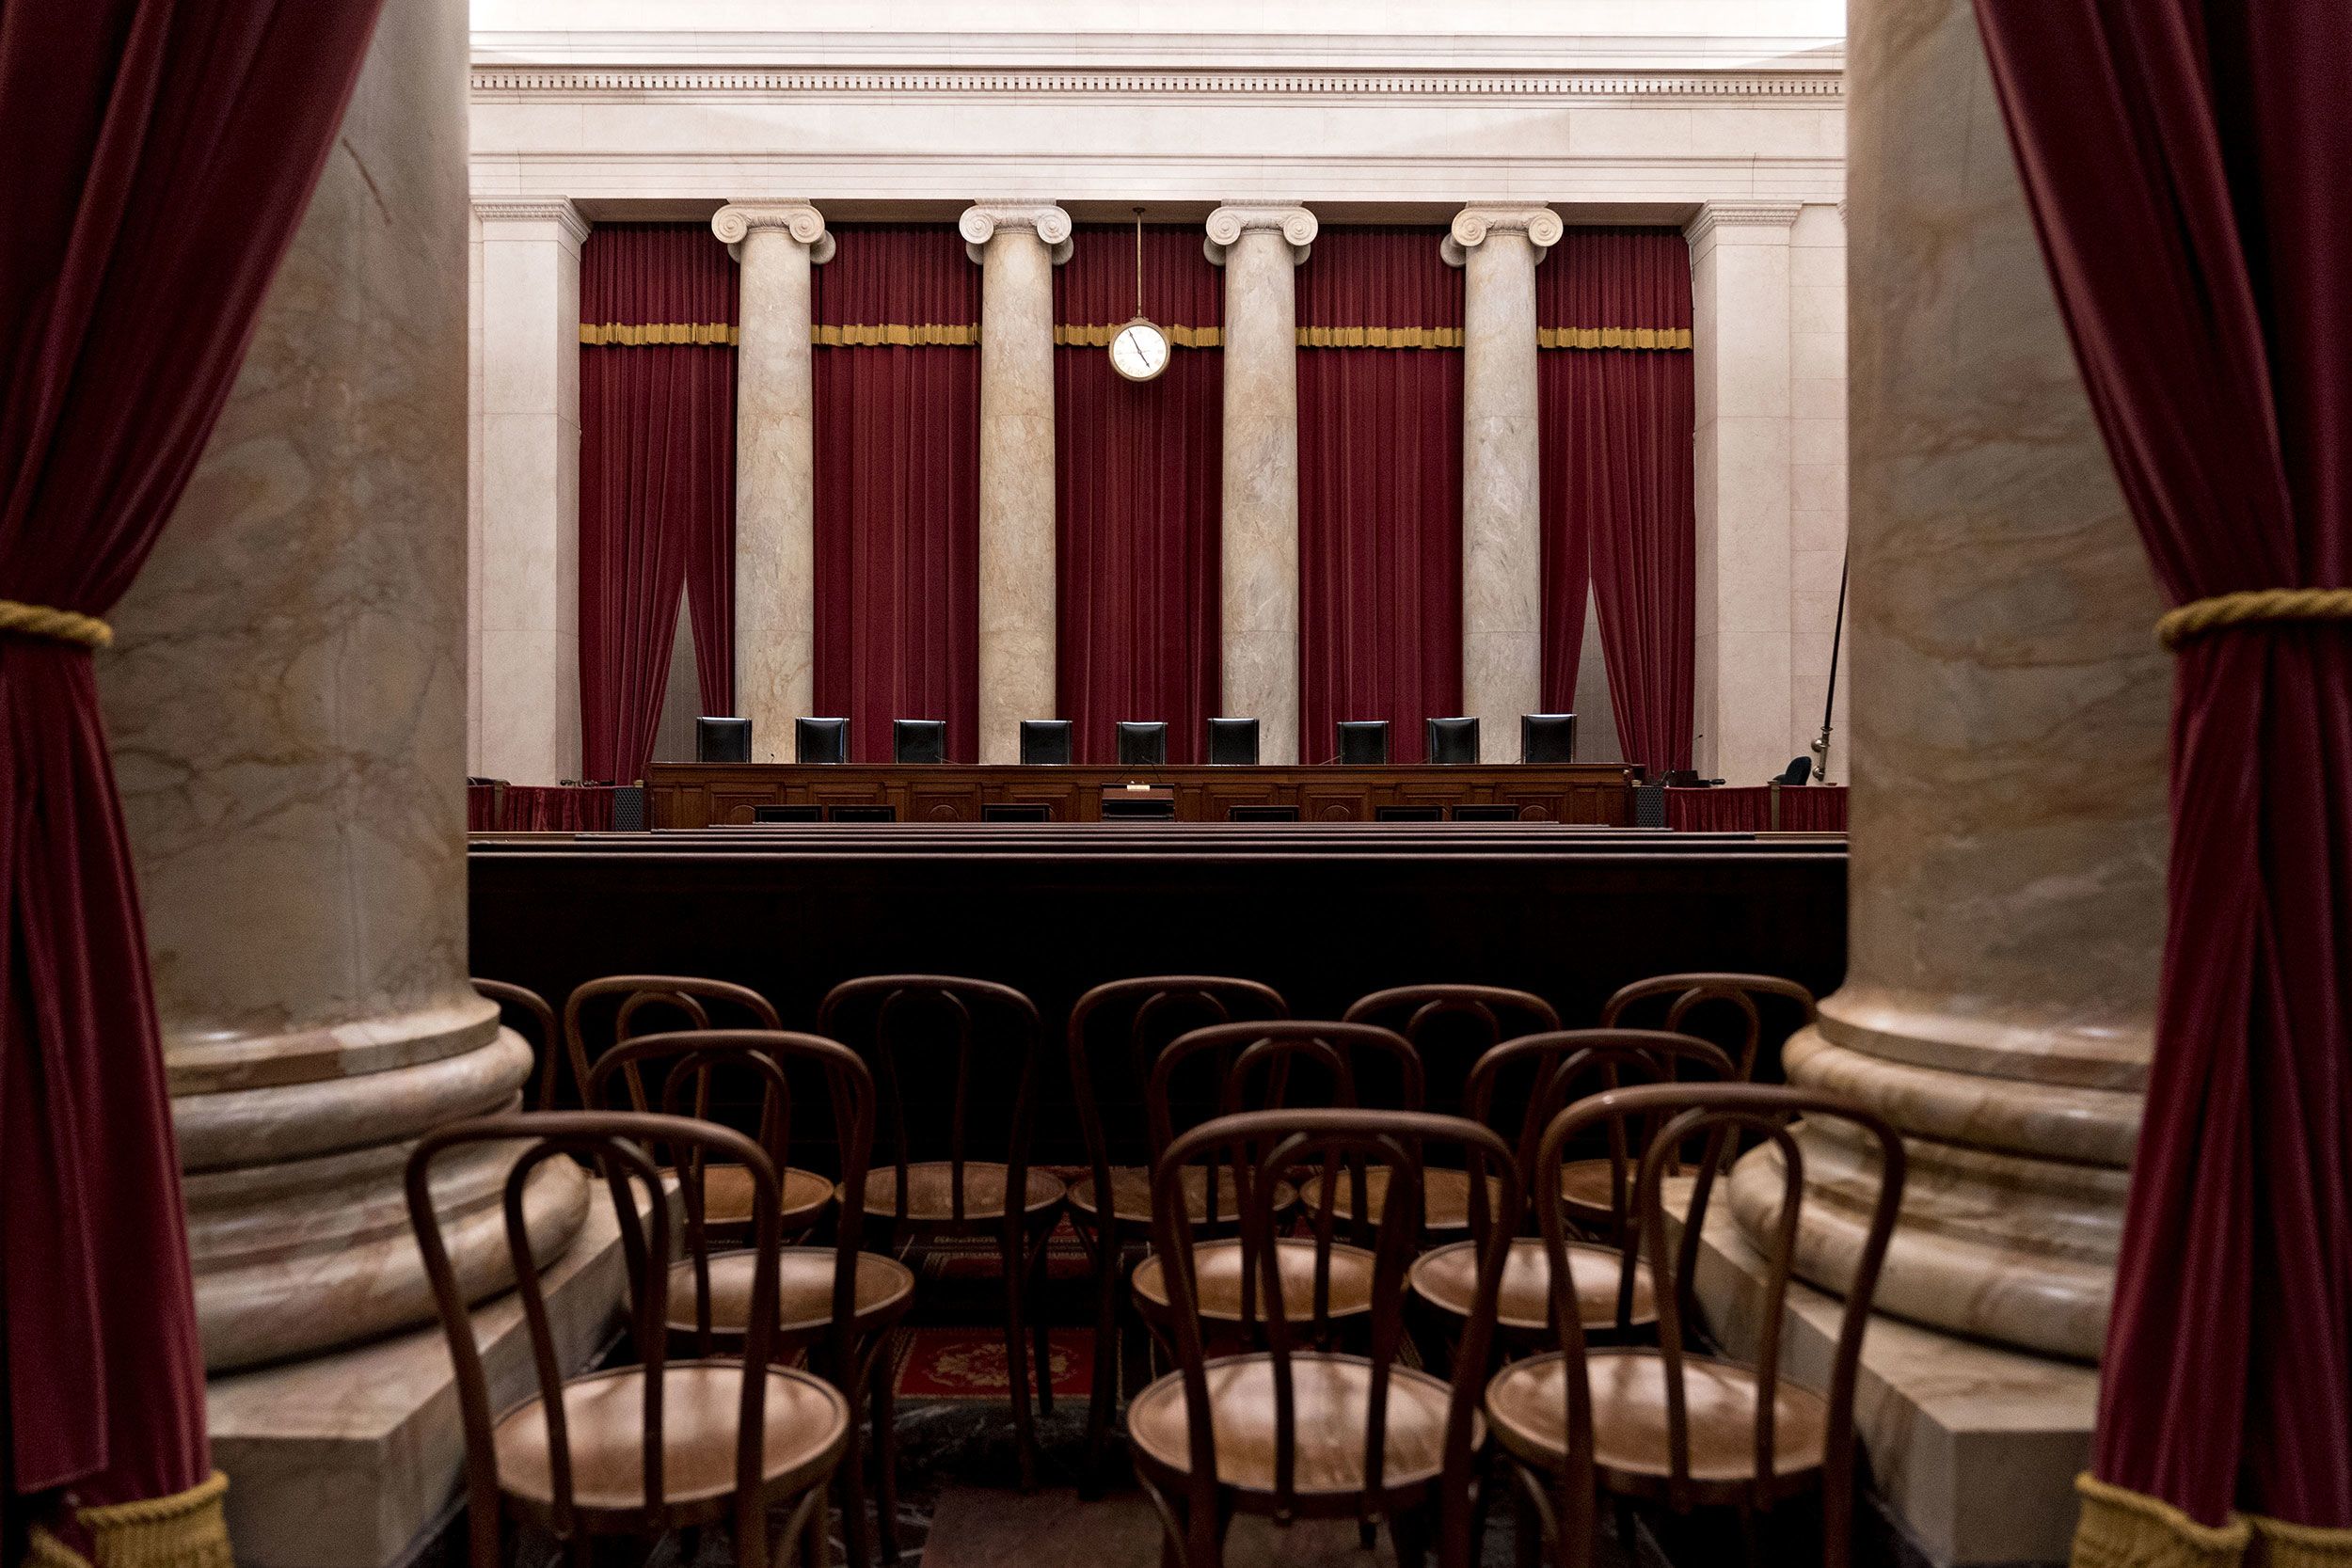 Meet all of the sitting Supreme Court justices ahead of the new